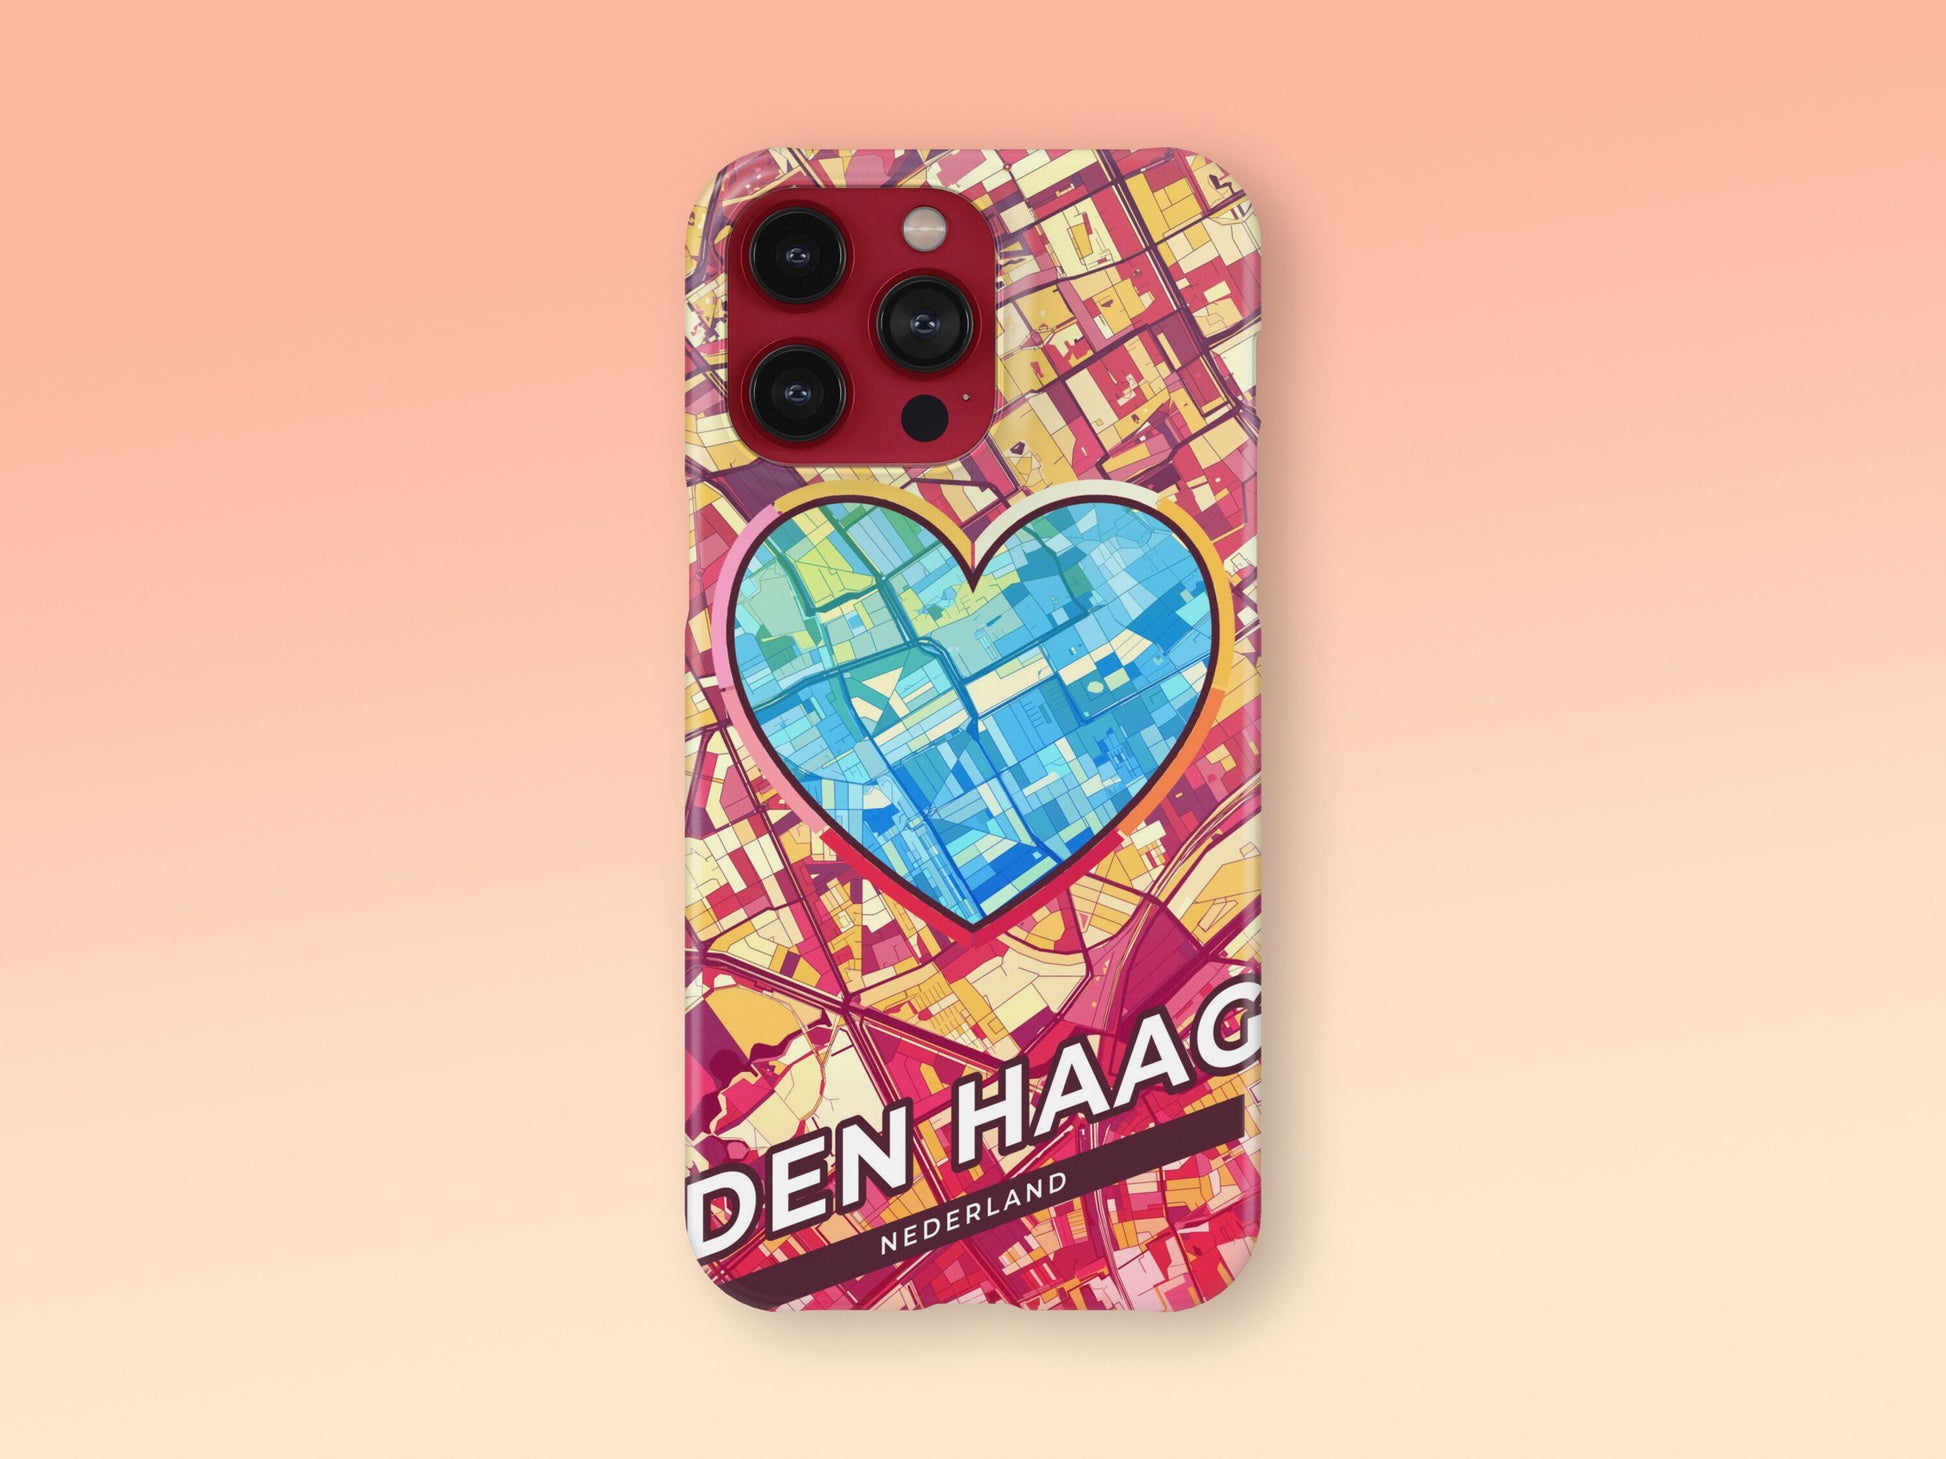 The Hague Netherlands slim phone case with colorful icon 2